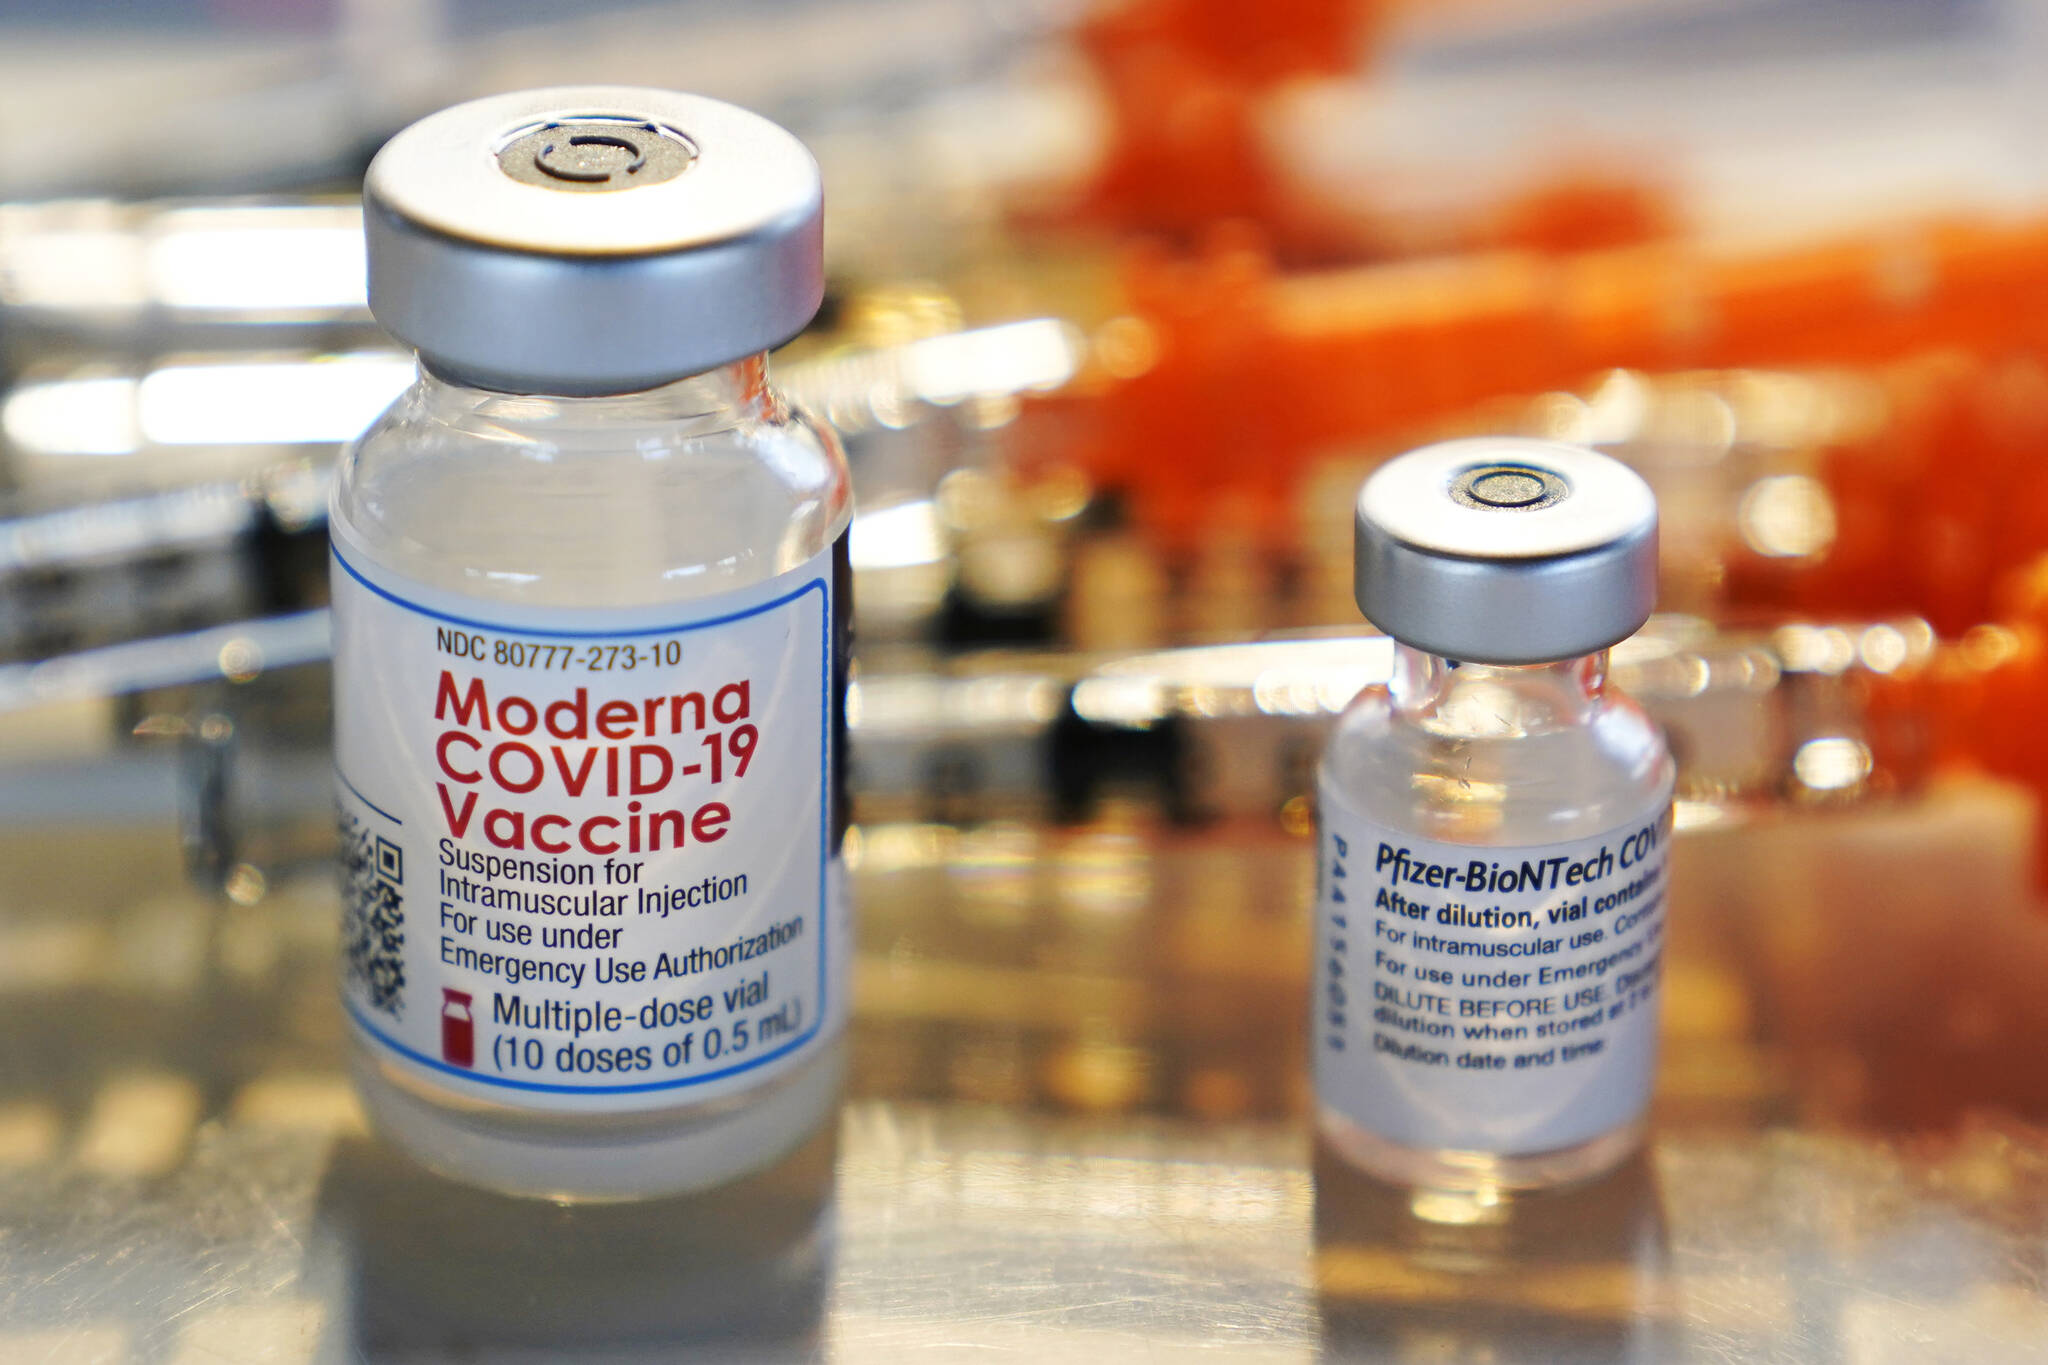 Vials for the Moderna and Pfizer COVID-19 vaccines are seen at a temporary clinic in Exeter, N.H. on Thursday, Feb. 25, 2021. The Food and Drug Administration has authorized another booster dose of the Pfizer or Moderna COVID-19 vaccine for people age 50 and up, Tuesday, March 29, 2022. (AP Photo / Charles Krupa)